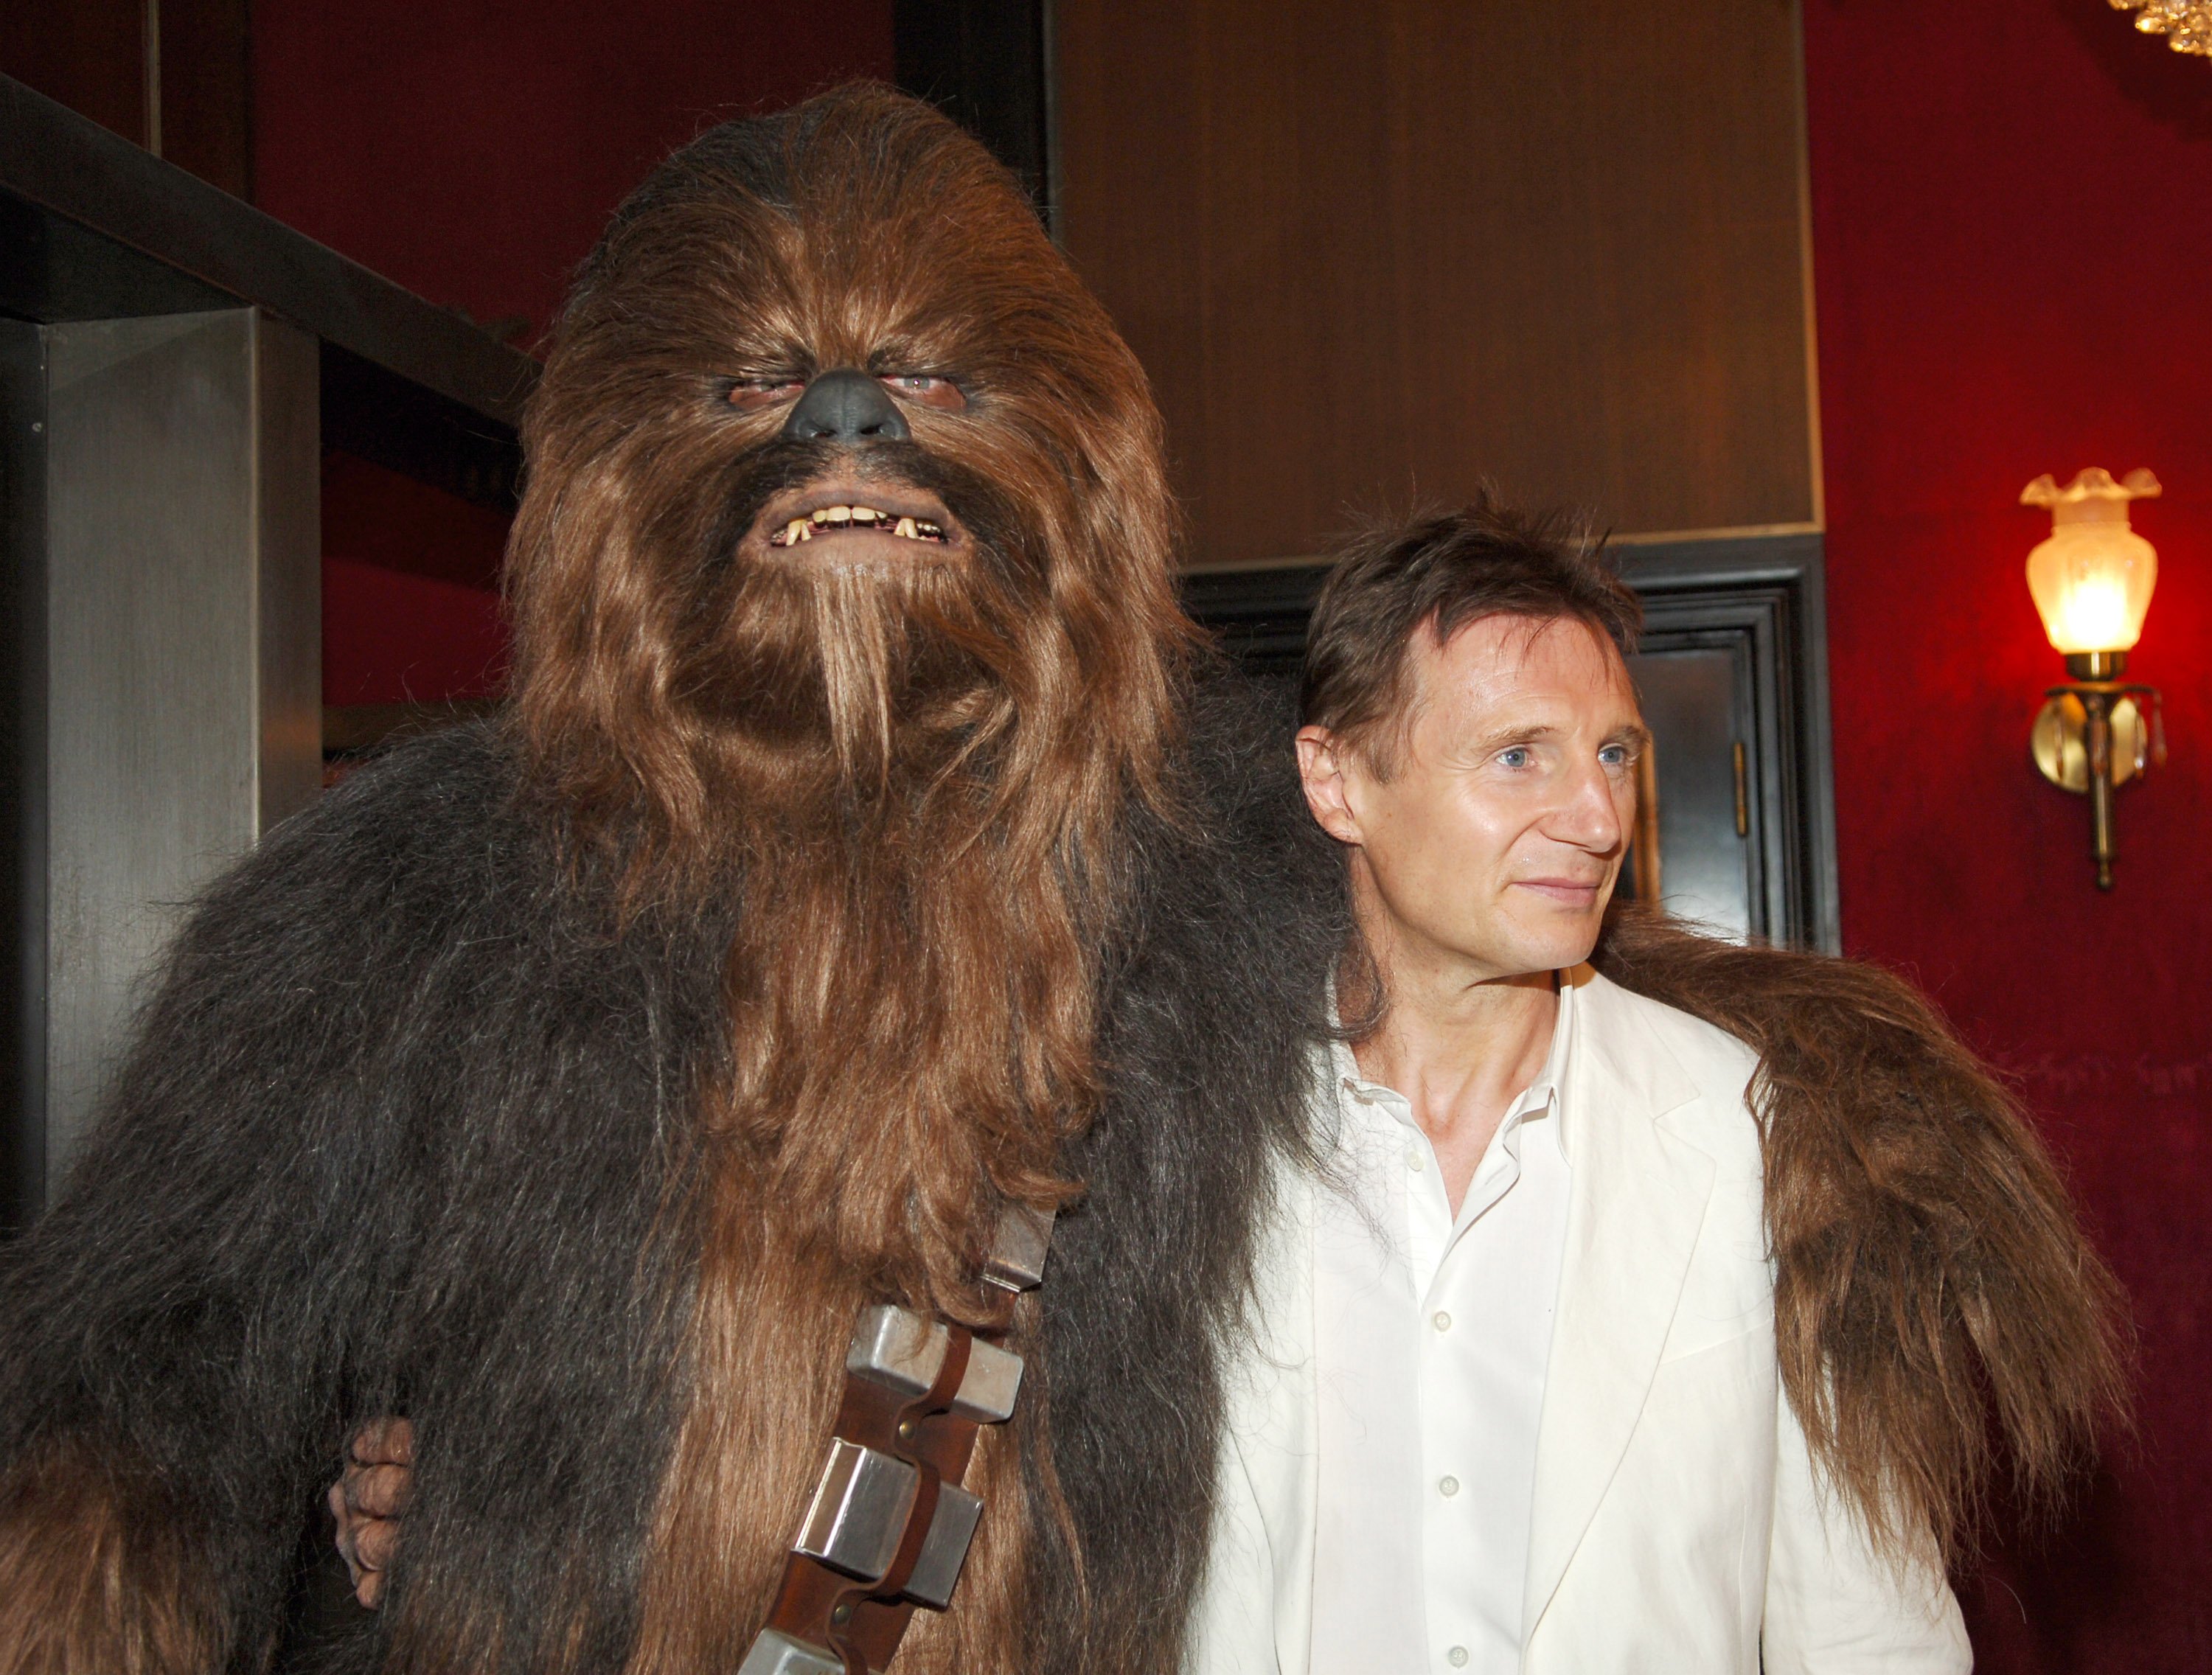 Chewbacca and Liam Neeson attend the premiere of Star Wars Episode III: Revenge of the Sith